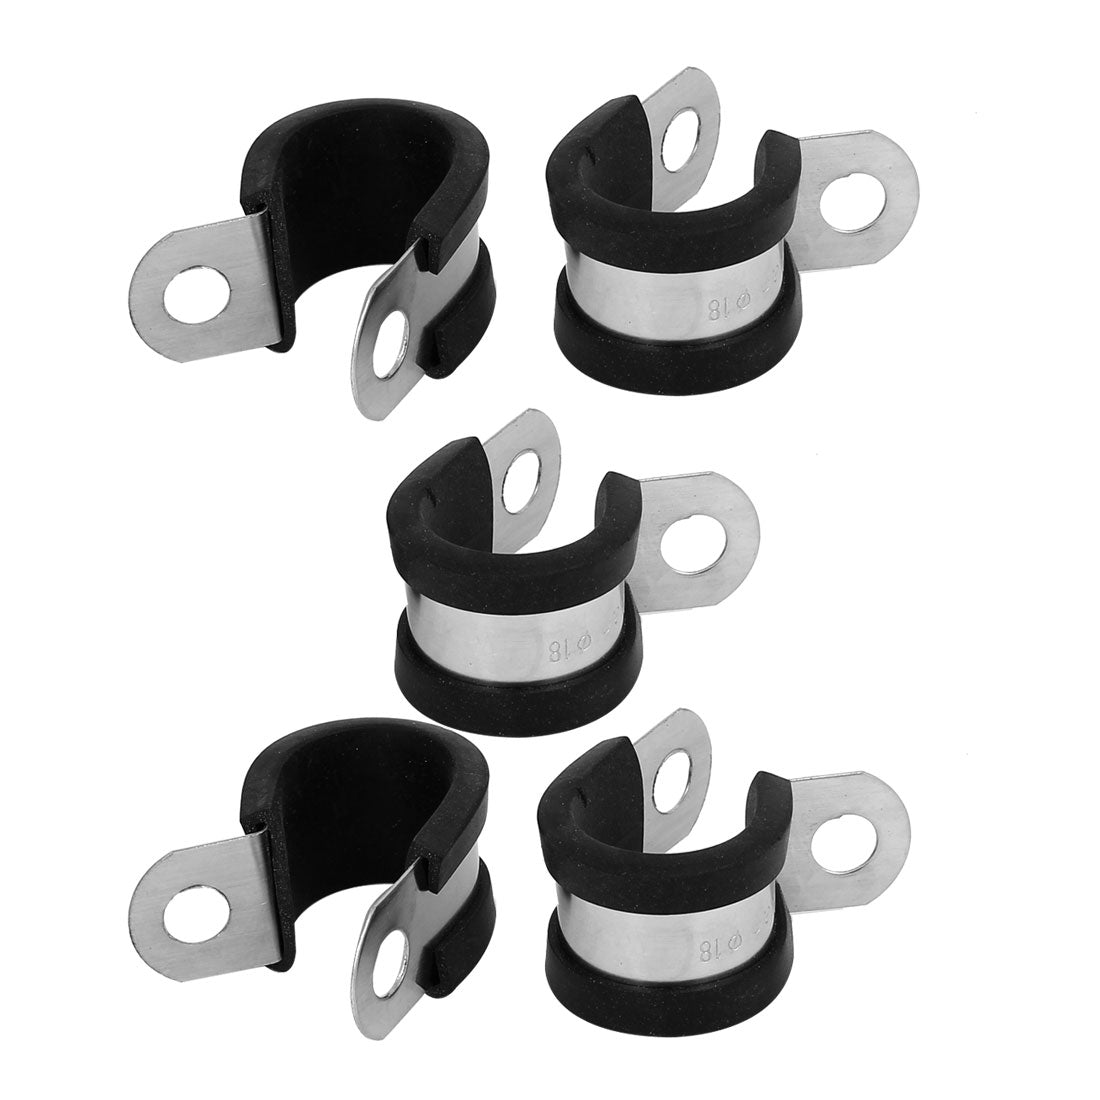 uxcell Uxcell 18mm Dia EPDM Rubber Lined P Clips Water Pipe Tube Clamps Holder 5pcs